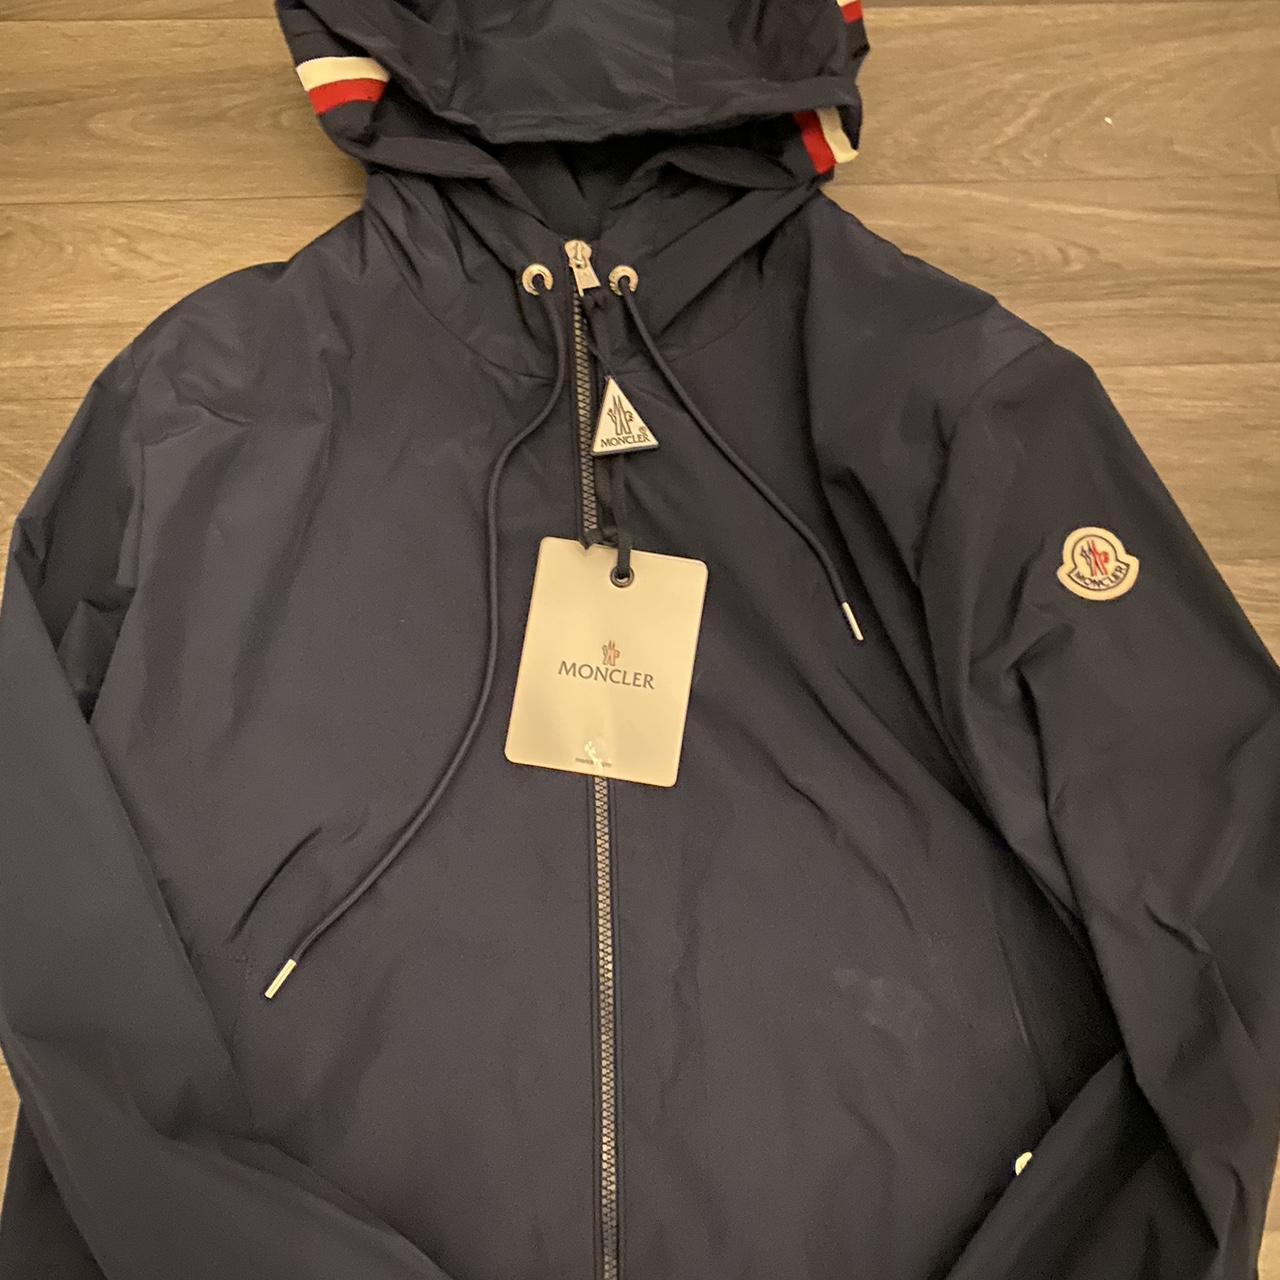 Moncler windbreaker size small received as a gift... - Depop